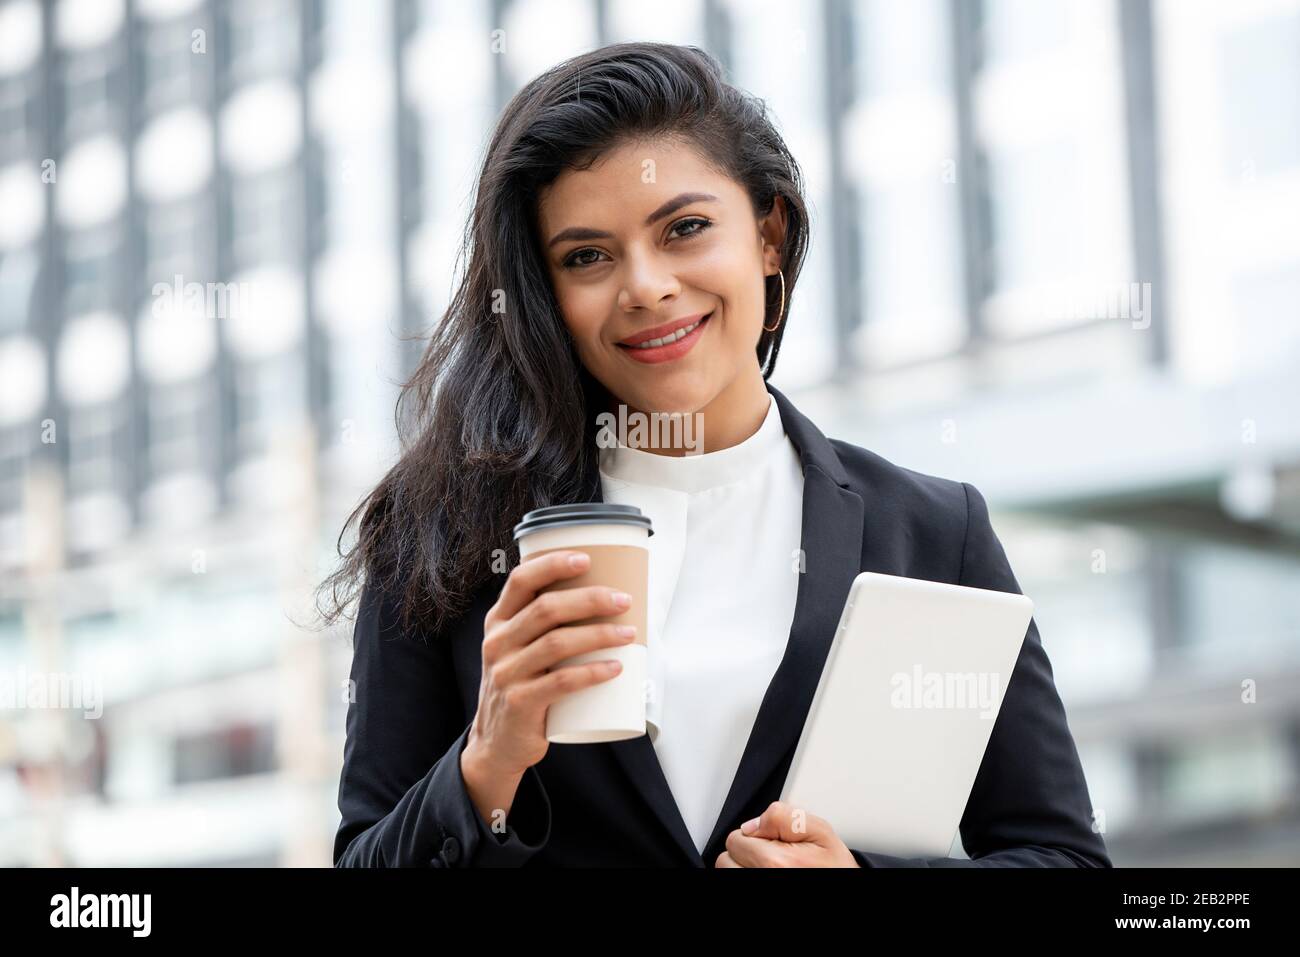 Beautiful smiling Latino businesswoman holding coffee cup and tablet computer outdoors in the city Stock Photo